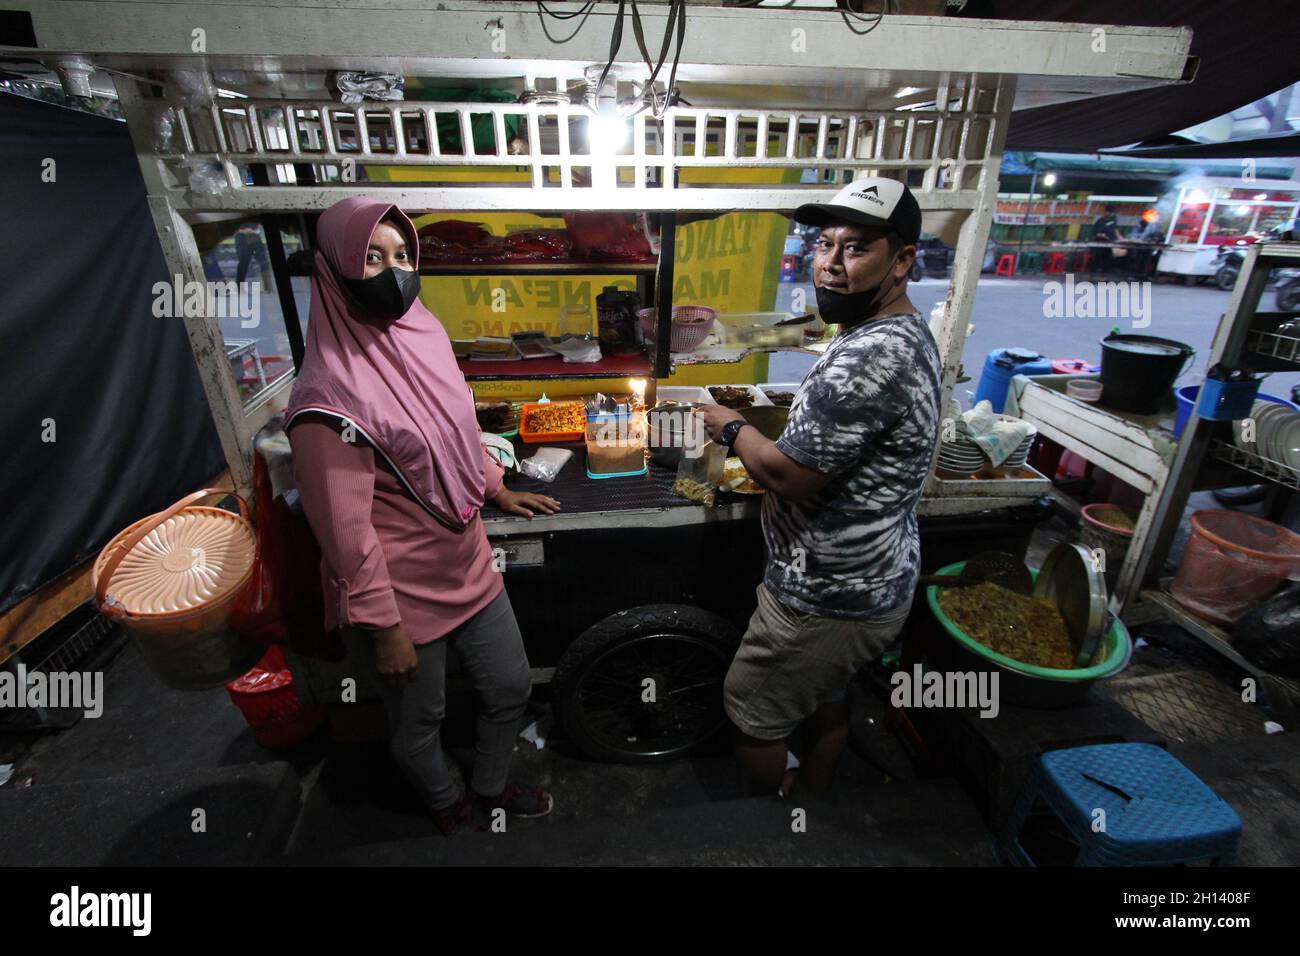 Karawang, Indonesia. 15th Oct, 2021. Endi, 39, the son-in-law of the shop owner and his wife Devi, 32, the daughter of one of the owners of the Soto Tangkar stall, Mang Nean, who has been selling since 1980, poses for a photo at the legendary food stall Soto Tangkar typical of Karawang on Jalan Dewi Sartika, West Karawang, Karawang, West Java, Indonesia. This soto dish uses beef ribs and beef leg veins seasoned with turmeric and chili. It tastes savory and slightly sweet. Interestingly, this delicious dish is cooked traditionally. Almost all ingredients are steamed in a pot over coals of firew Stock Photo